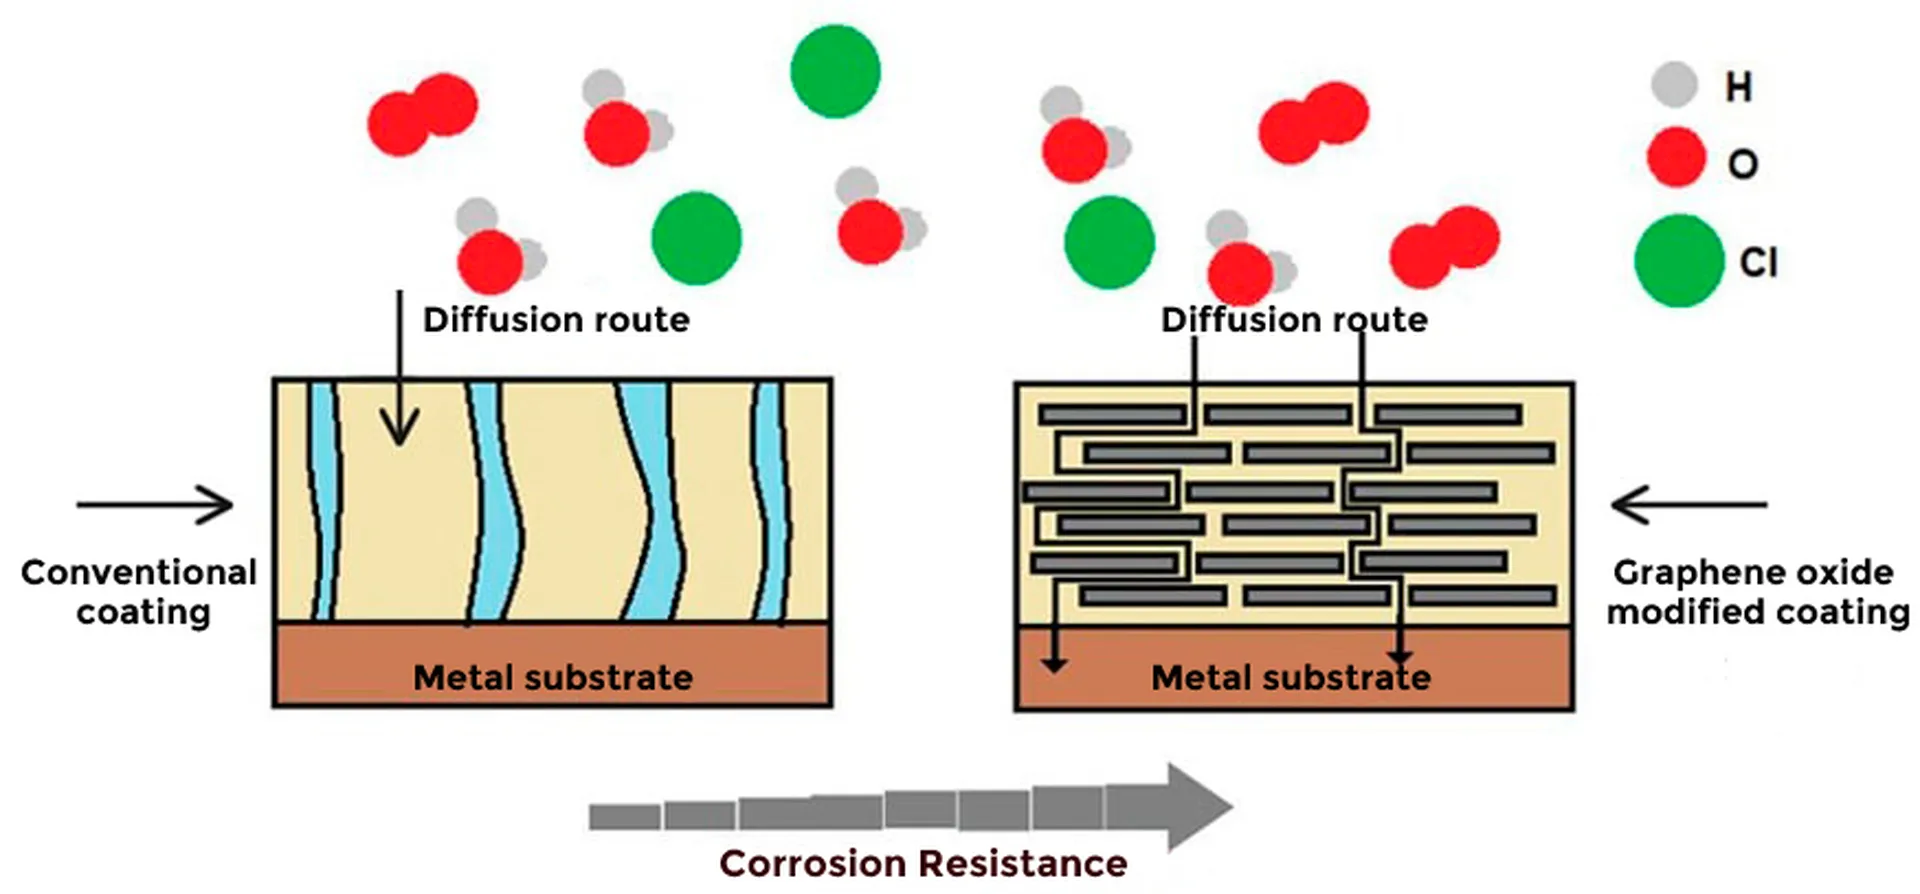 Scientific advances in corrosion protection using graphene coatings